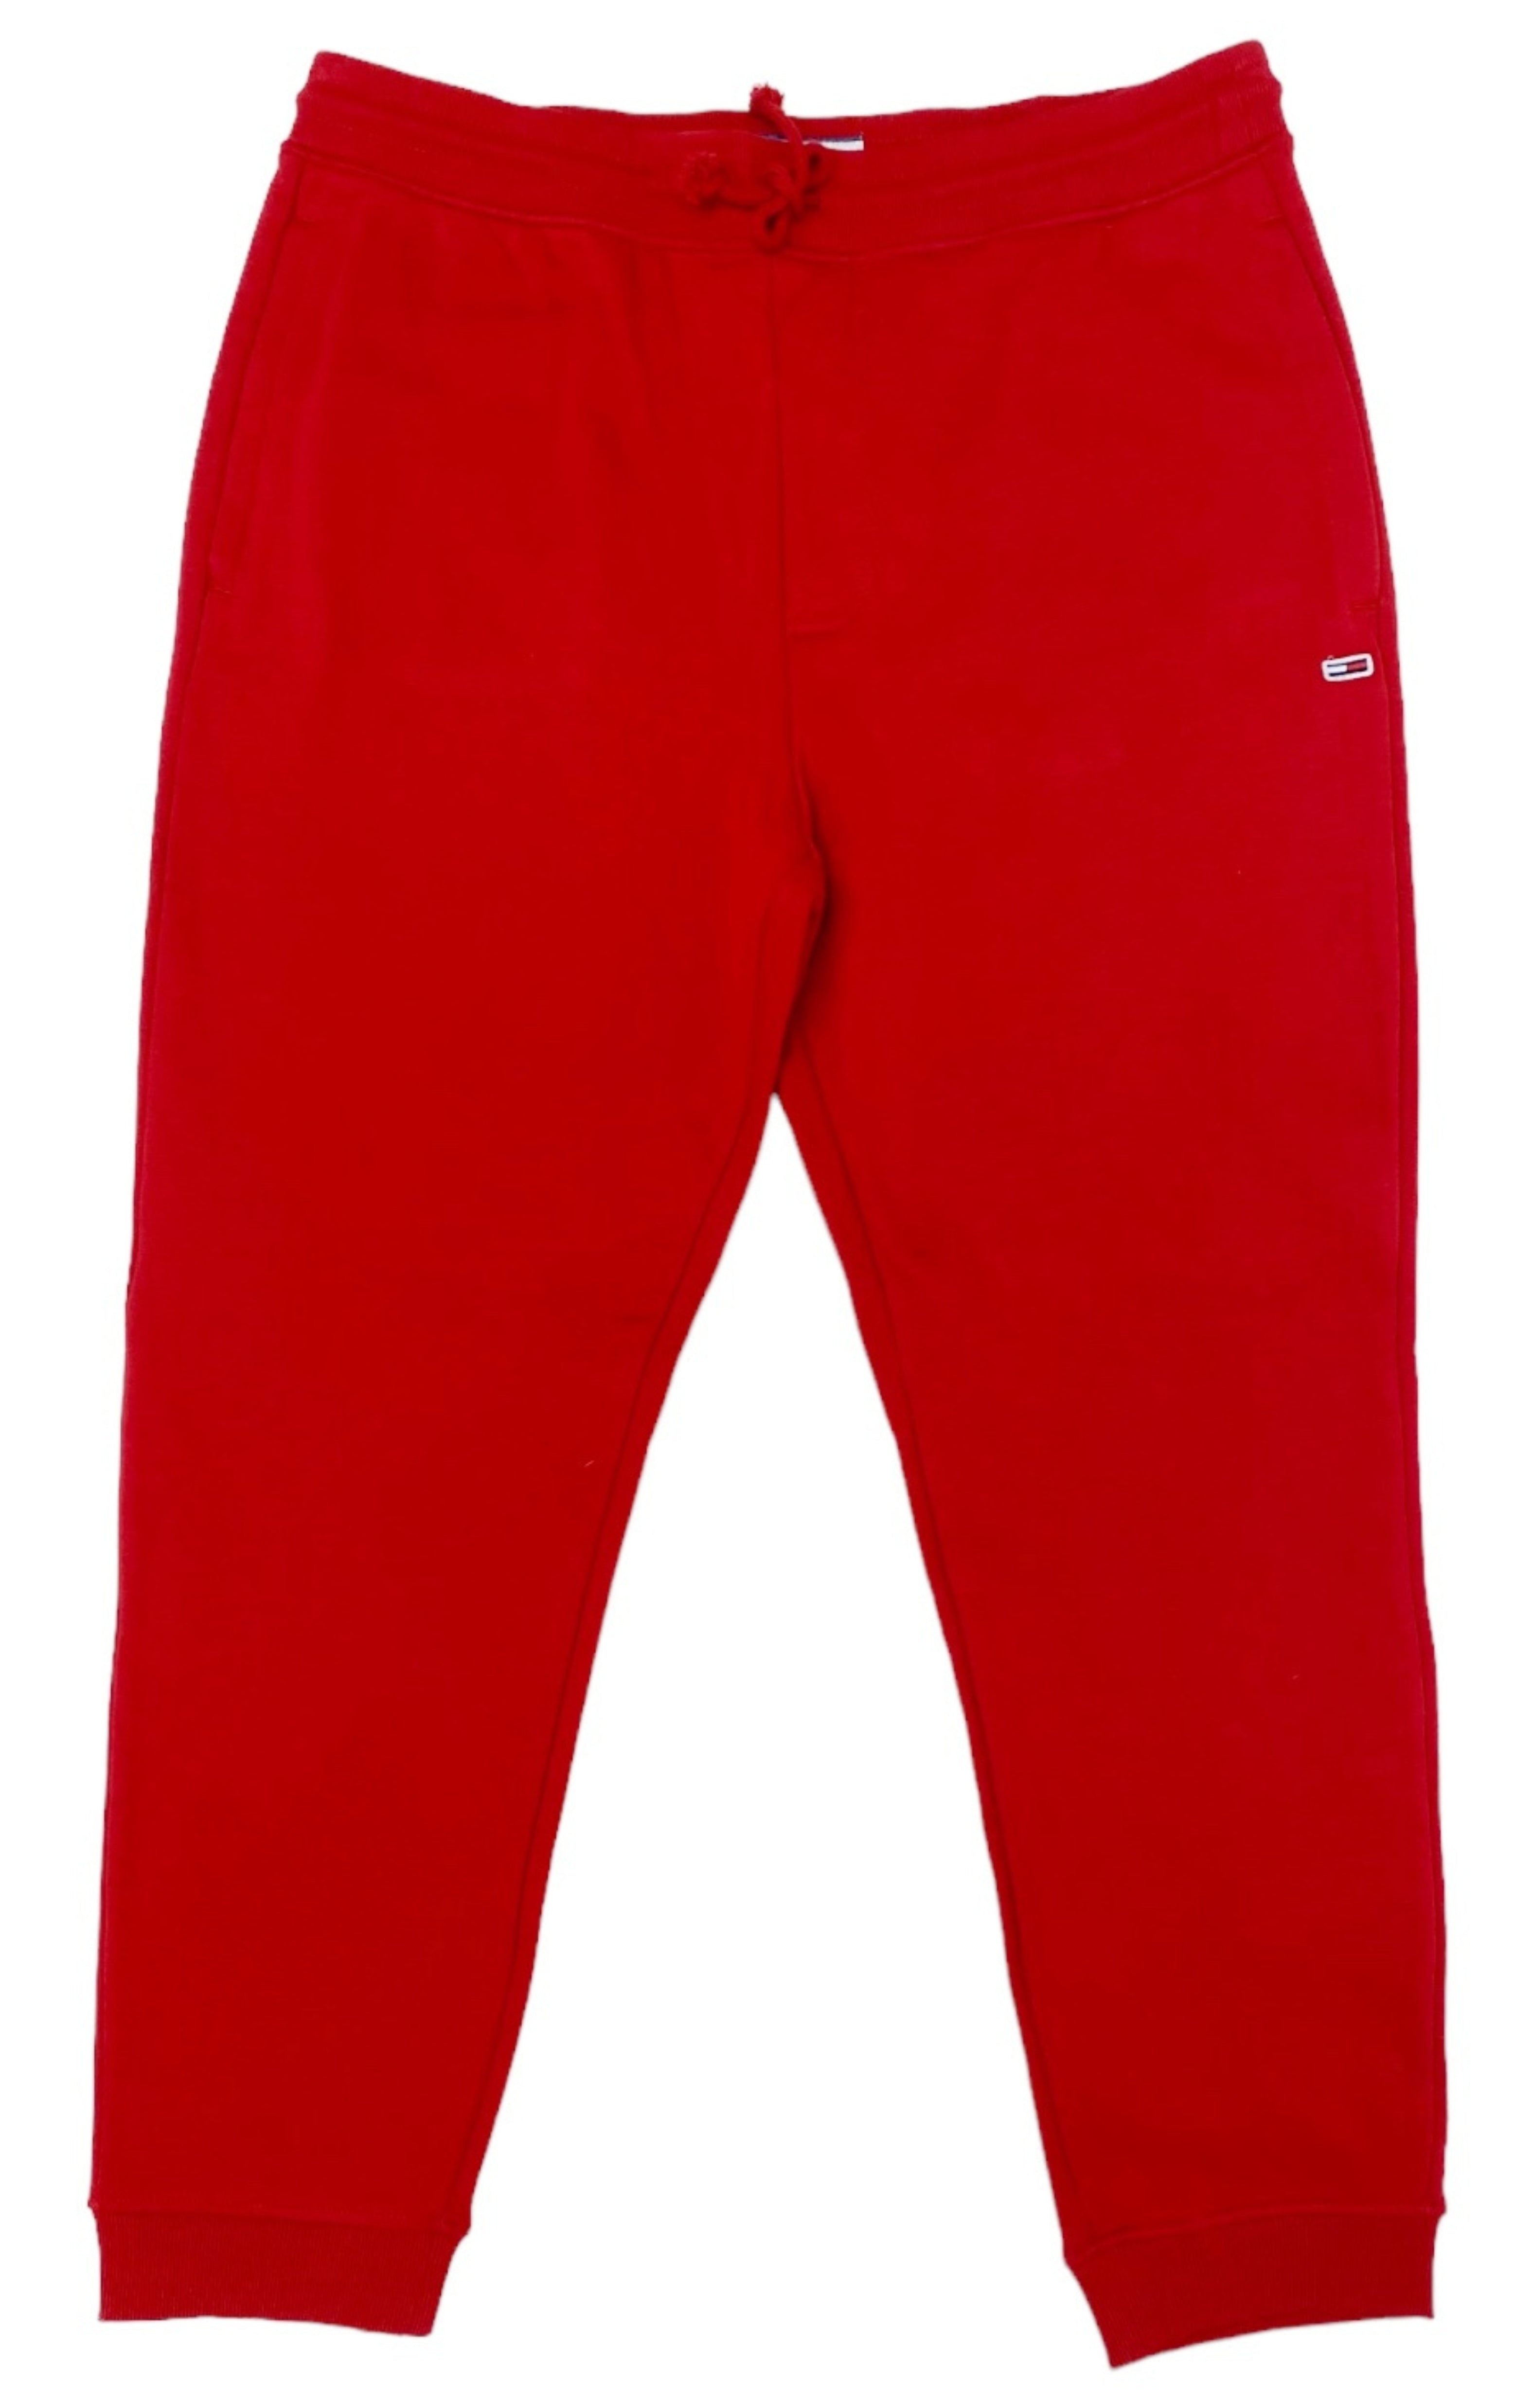 TOMMY JEANS (NEW) with tags Sweatpants Size: 2XL